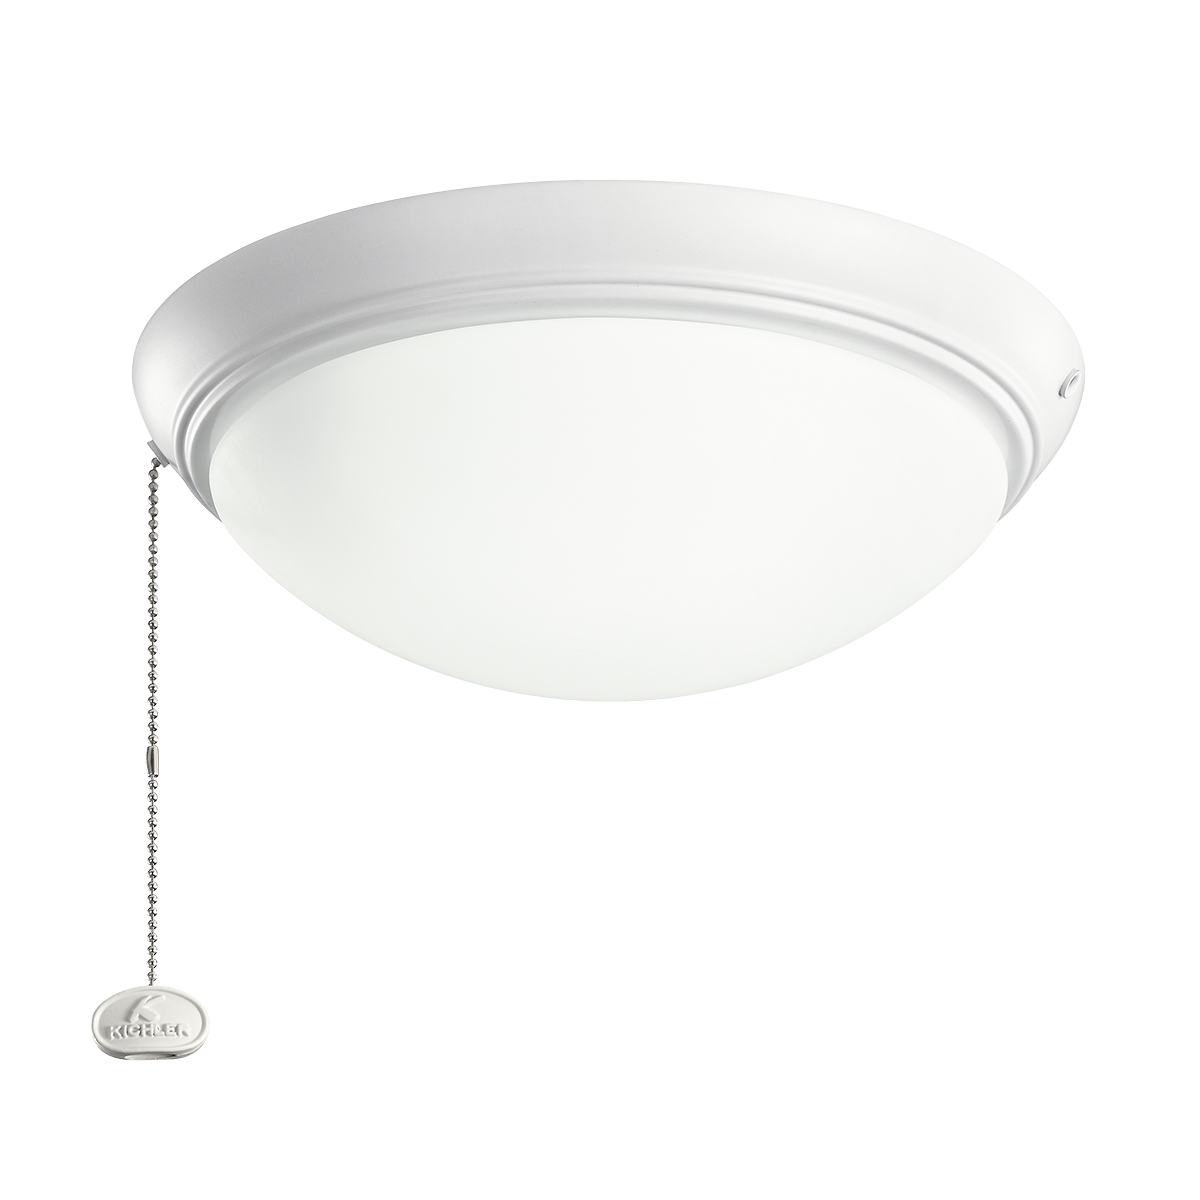 Low profile Etched Cased Opal LED Ceiling Fan fixture in White